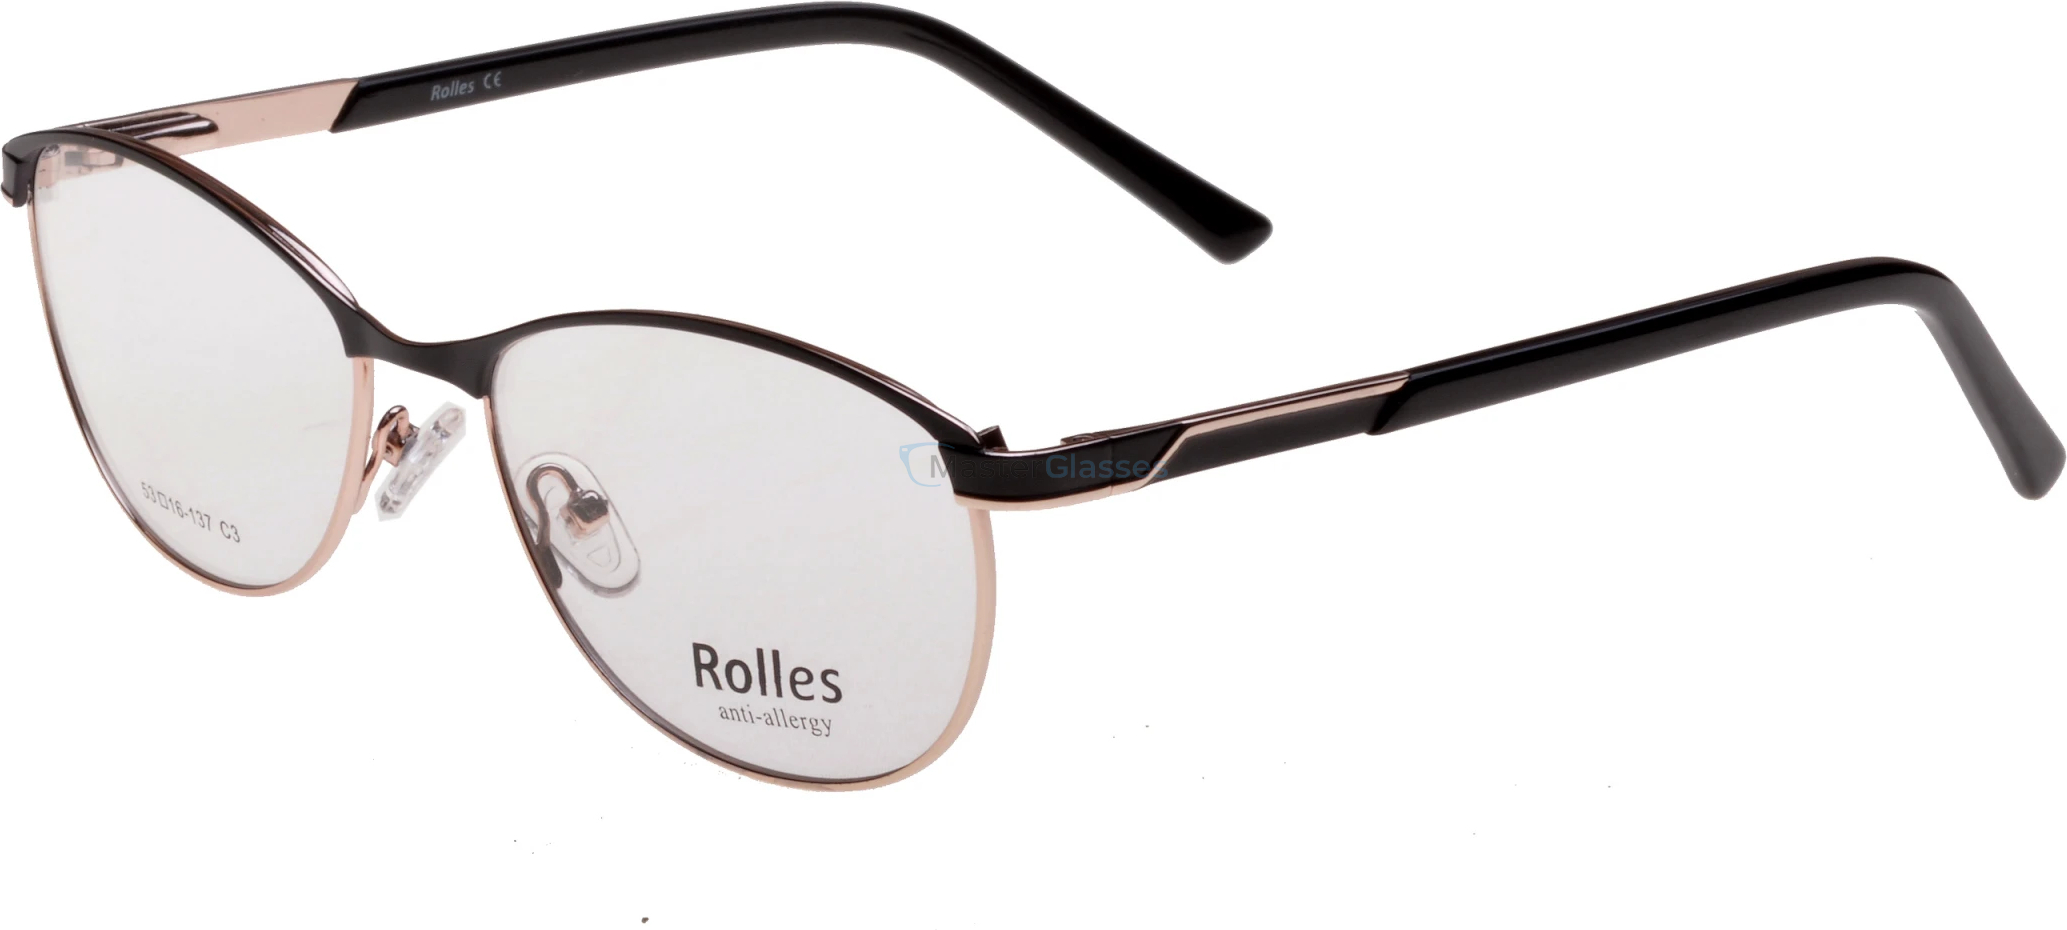  Rolles 350 03